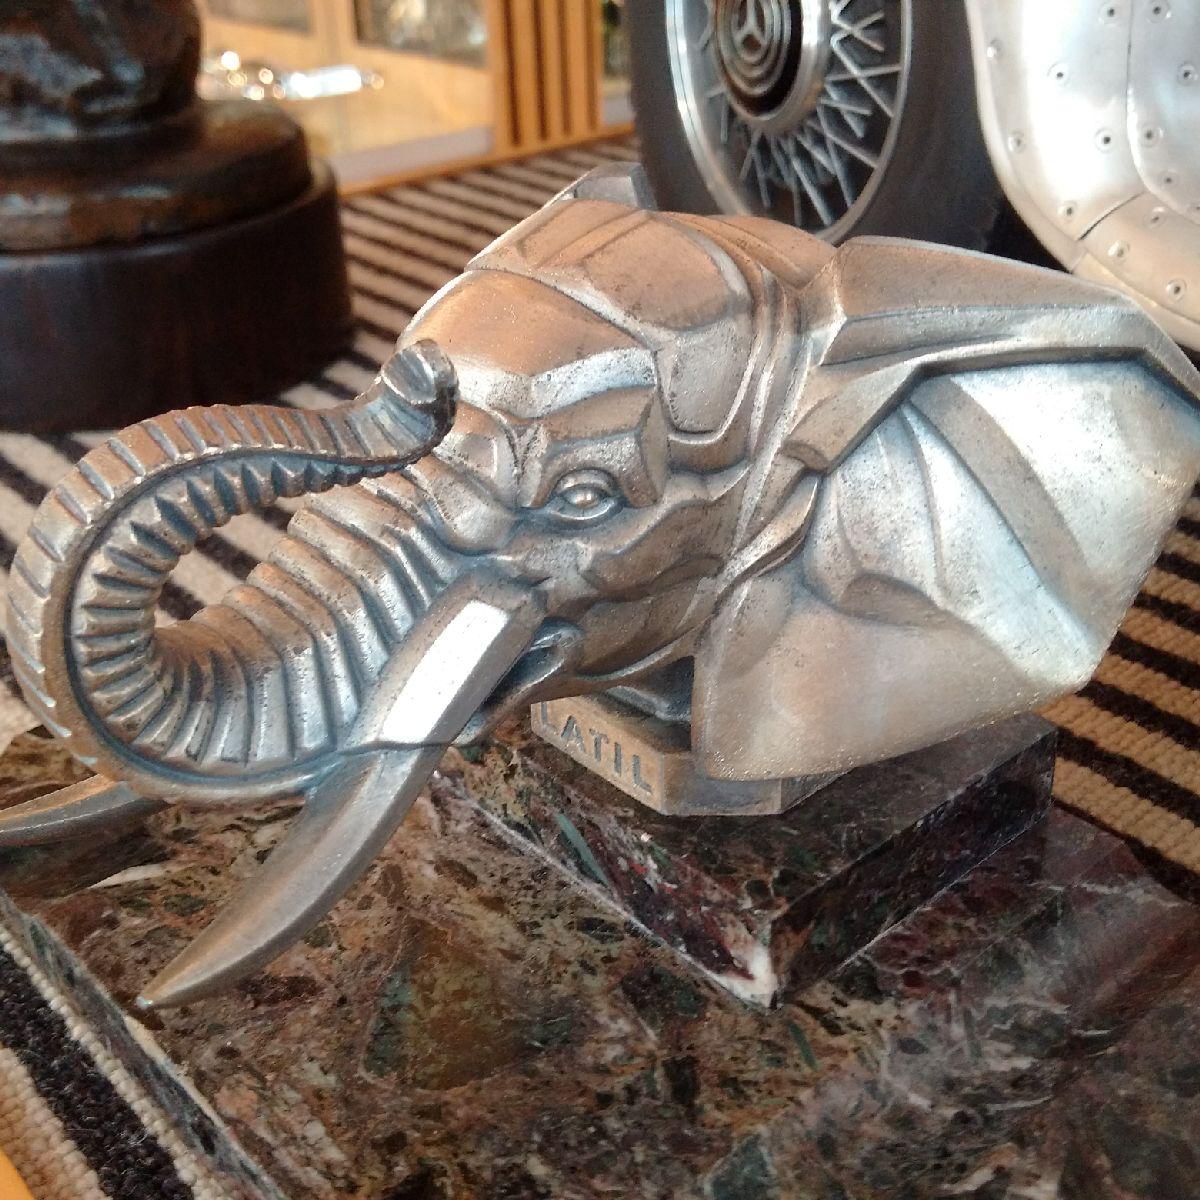 François Bazin (French, 1897-1956)

‘The Latil Elephant’. 

A very striking Art Deco marble pen tray featuring to the centre a polished heavy cast car mascot in the form of an elephant, with trunk held aloft. The mascot’s octagonal plinth has a